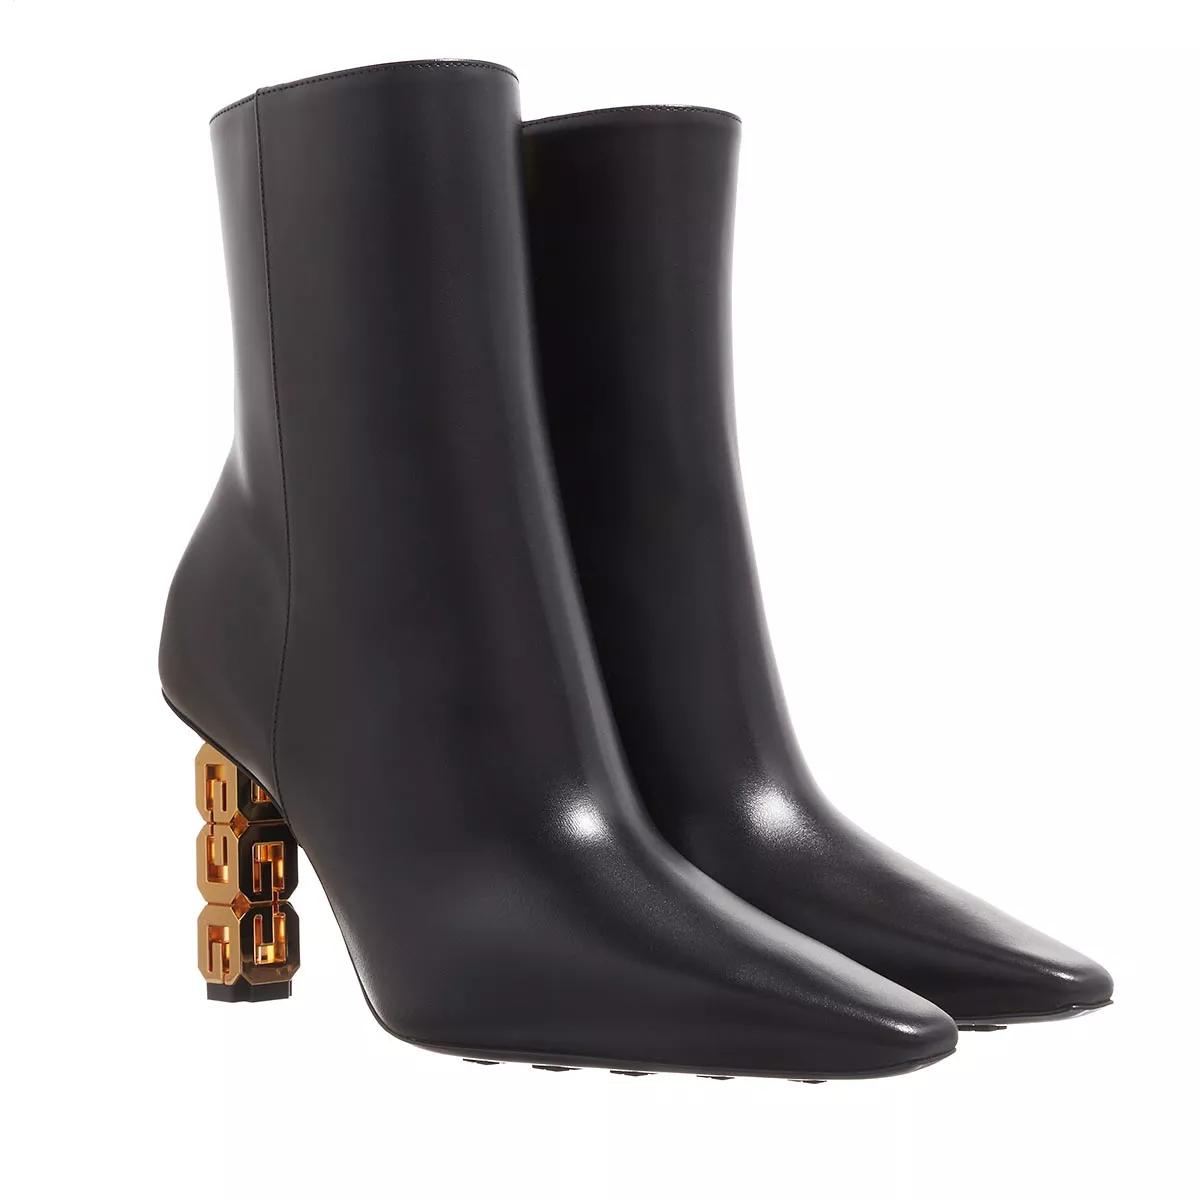 Givenchy Boots & laarzen - G Cube Ankle Boot 85 mm in zwart